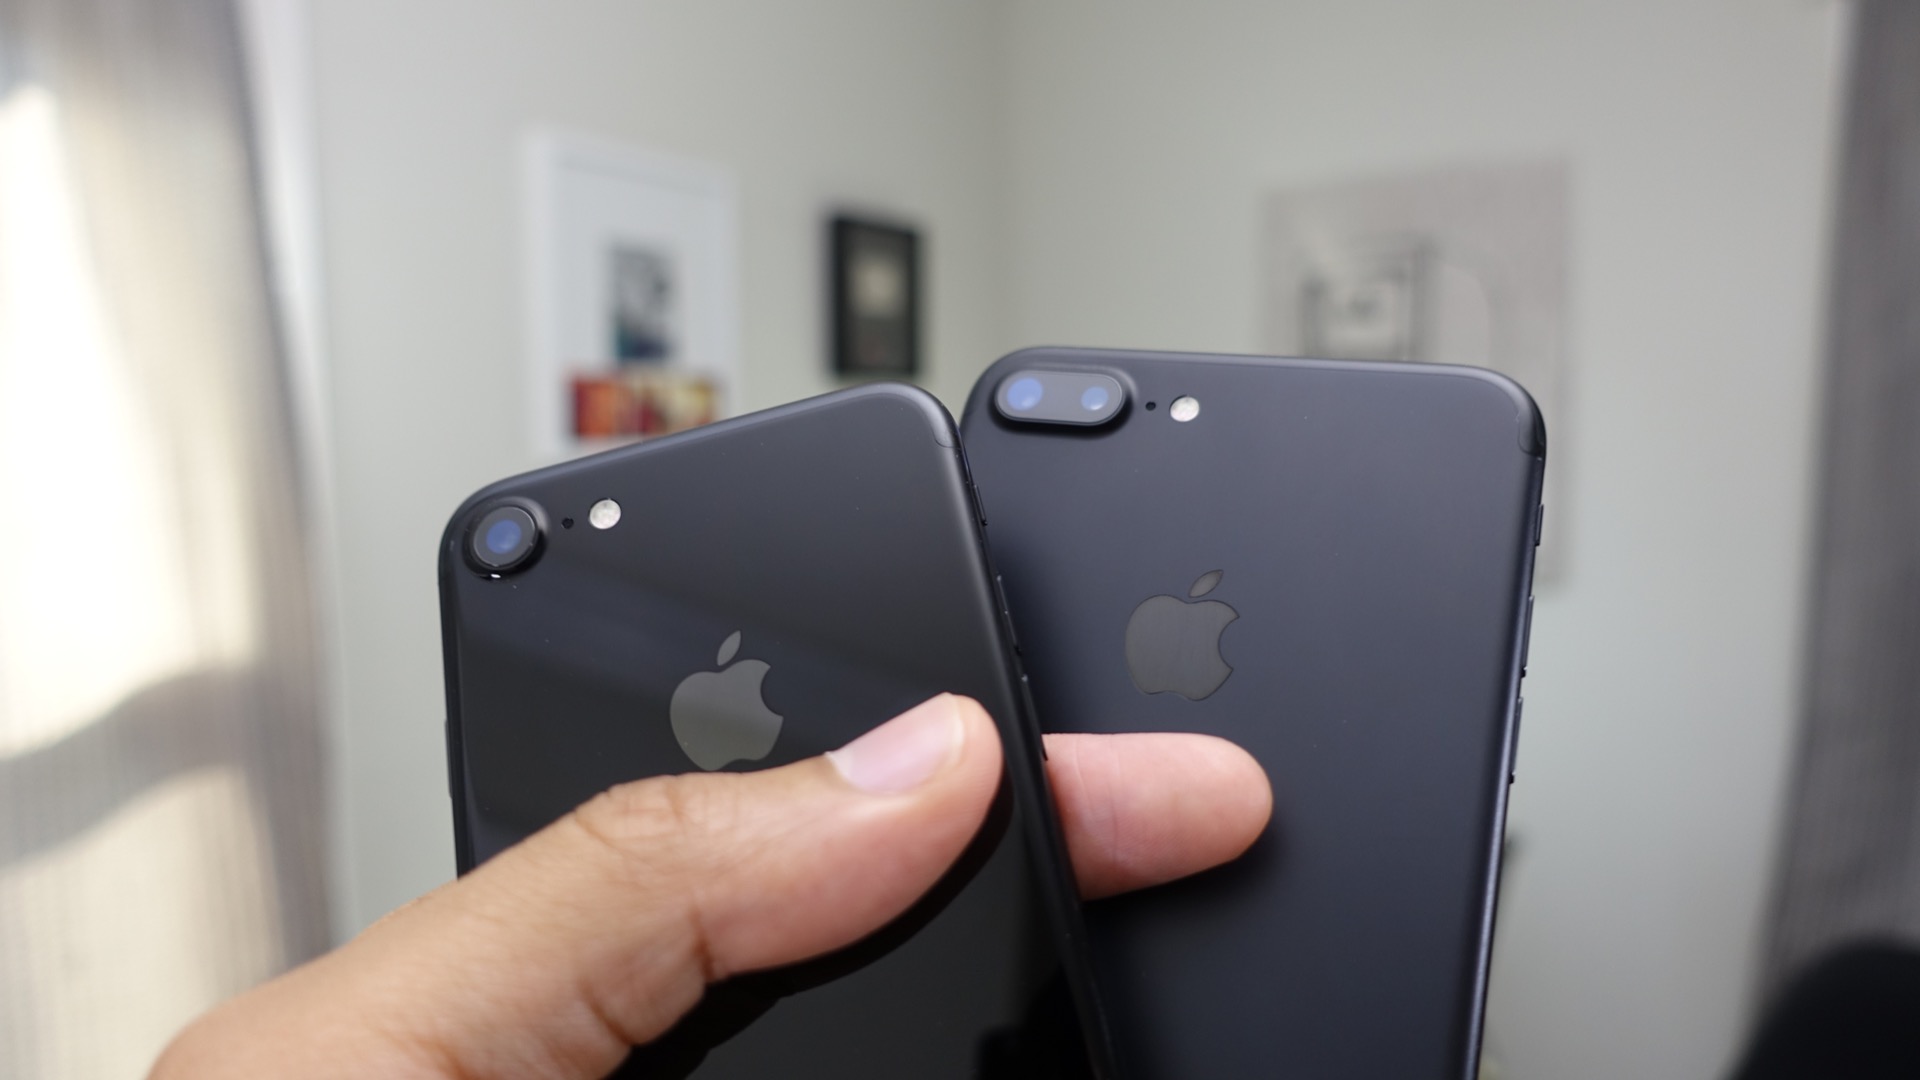 What's the best iPhone 7 to buy? - 9to5Mac